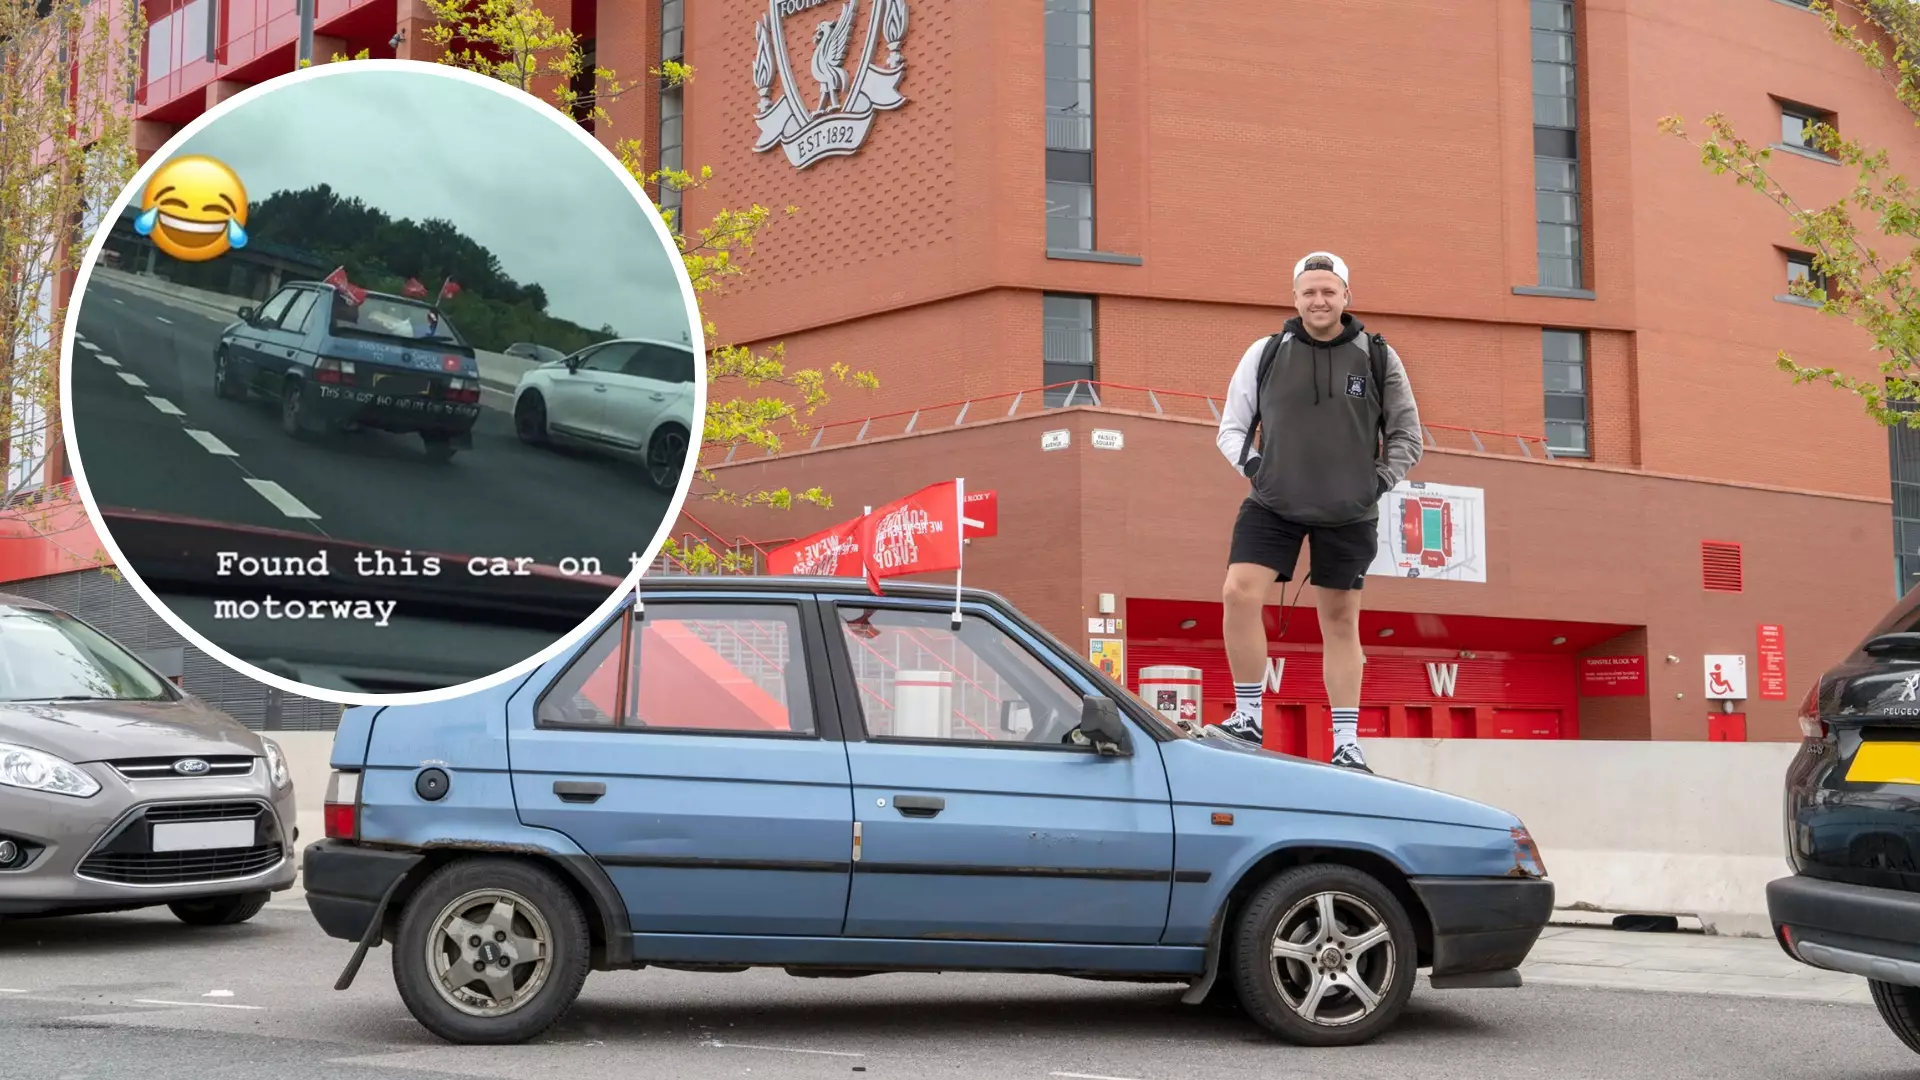 Liverpool Fan Bought A £40 Car And Is Driving To Madrid Instead Of Paying For £800 Flights